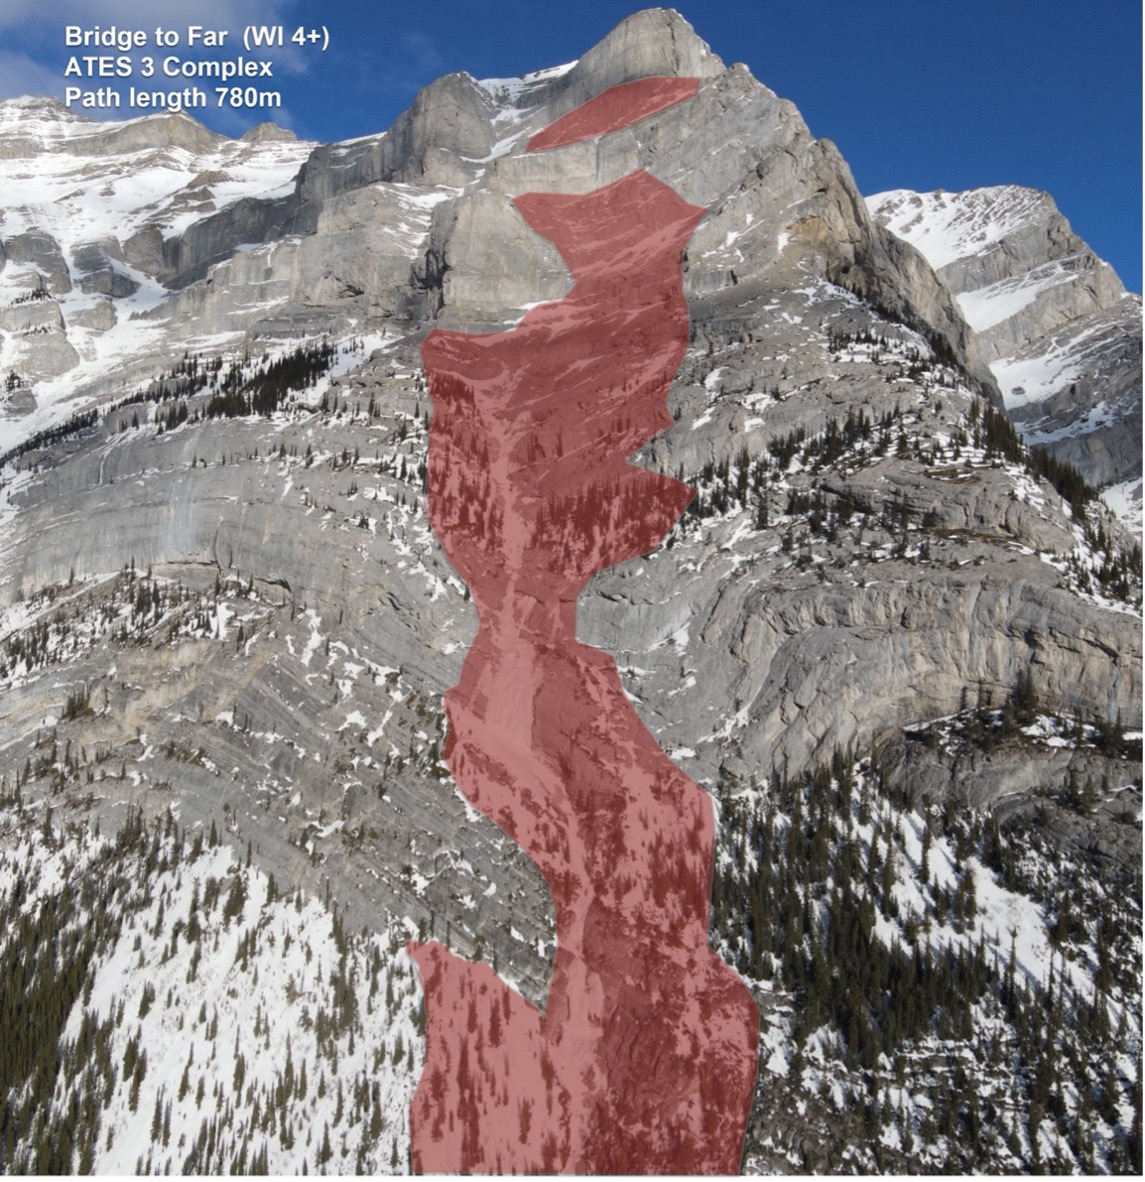 Image is aerial shot of the Bridge Too Far ice climb, marked with avalanche terrain in red